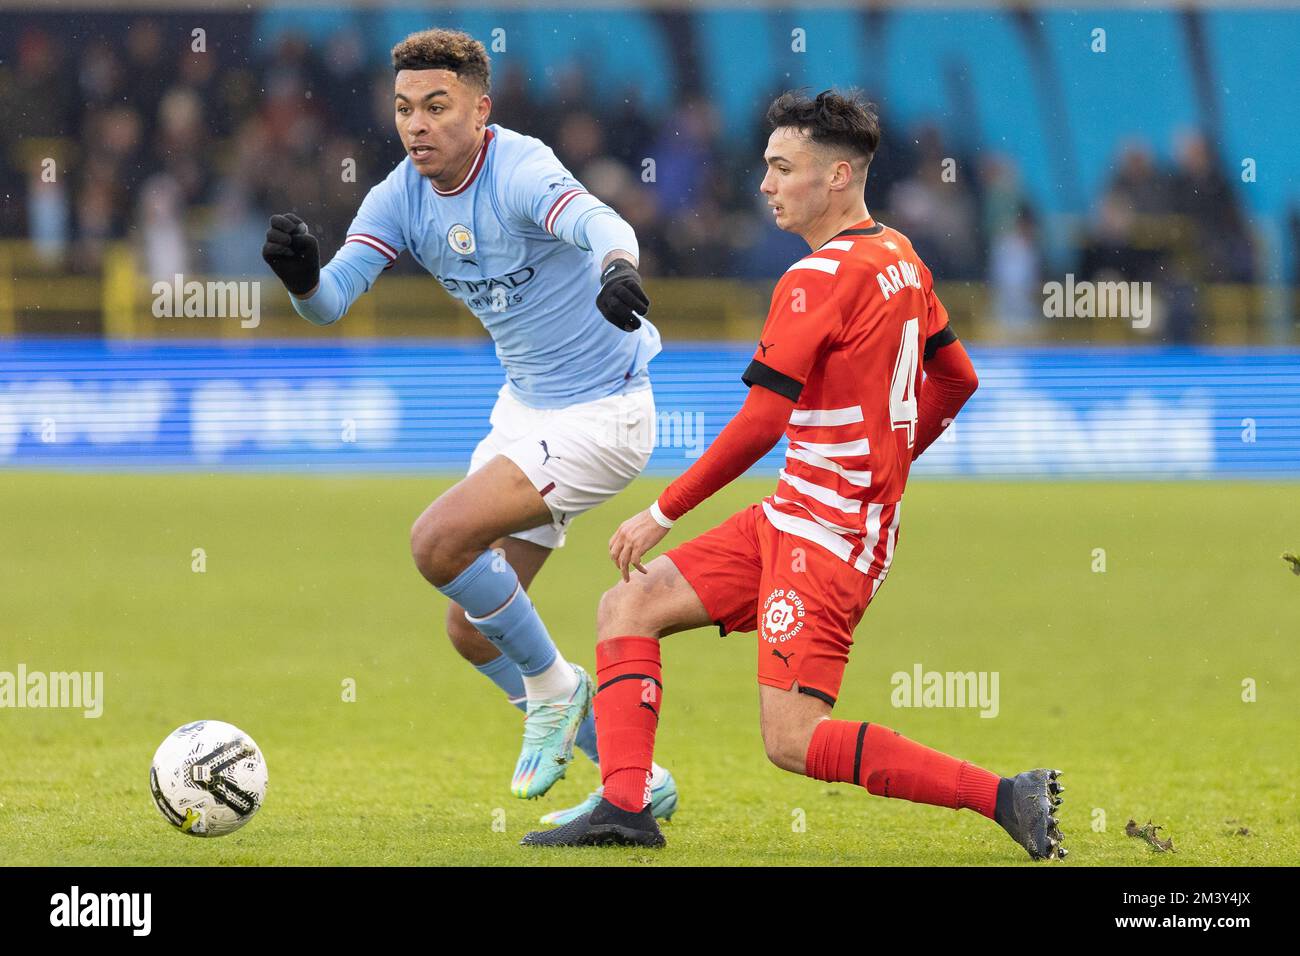 Morgan Rogers of Manchester City pressures Arnau Martinez #4 of Girona during the Mid season friendly match Manchester City vs Girona at Etihad Campus, Manchester, United Kingdom, 17th December 2022  (Photo by Phil Bryan/News Images) Stock Photo